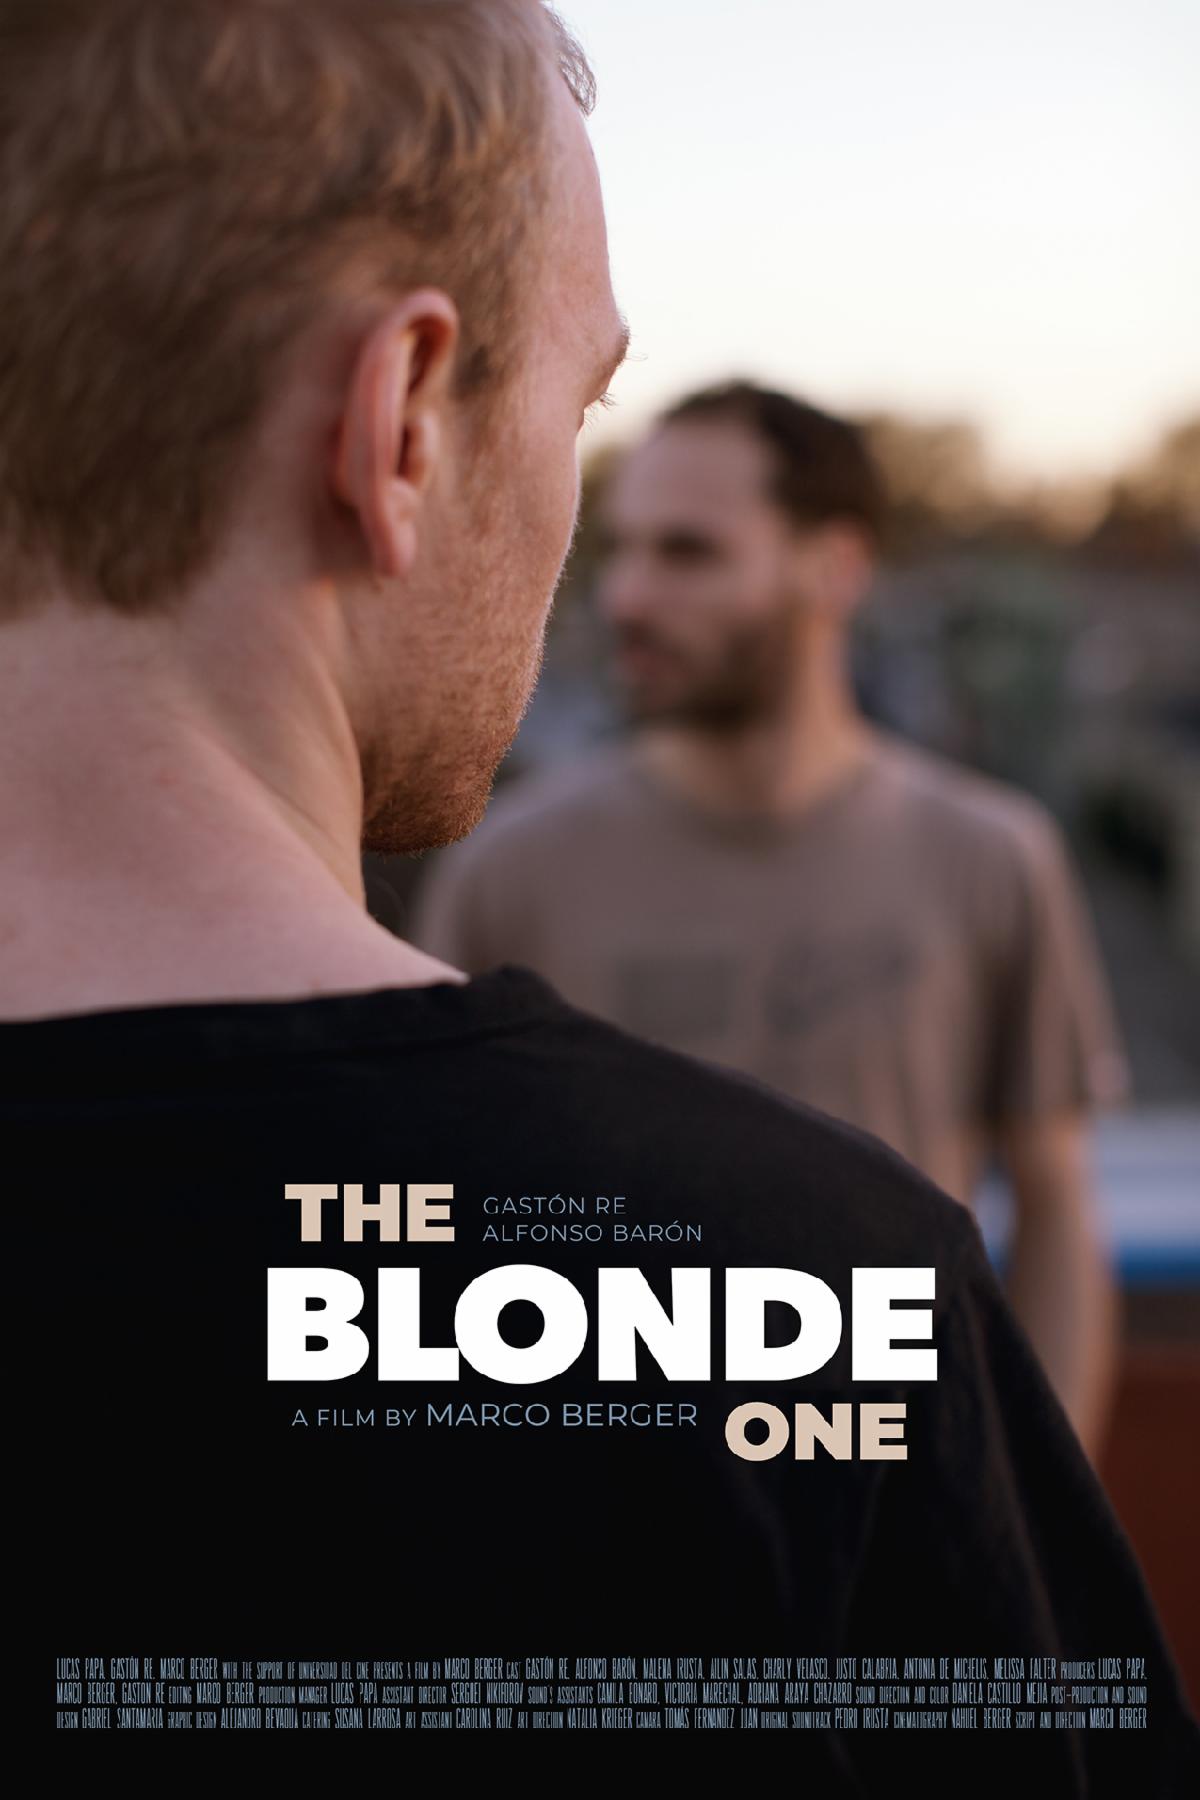 Movie poster for THE BLONDE ONE, feat Gaston Re and Alfonso Baron